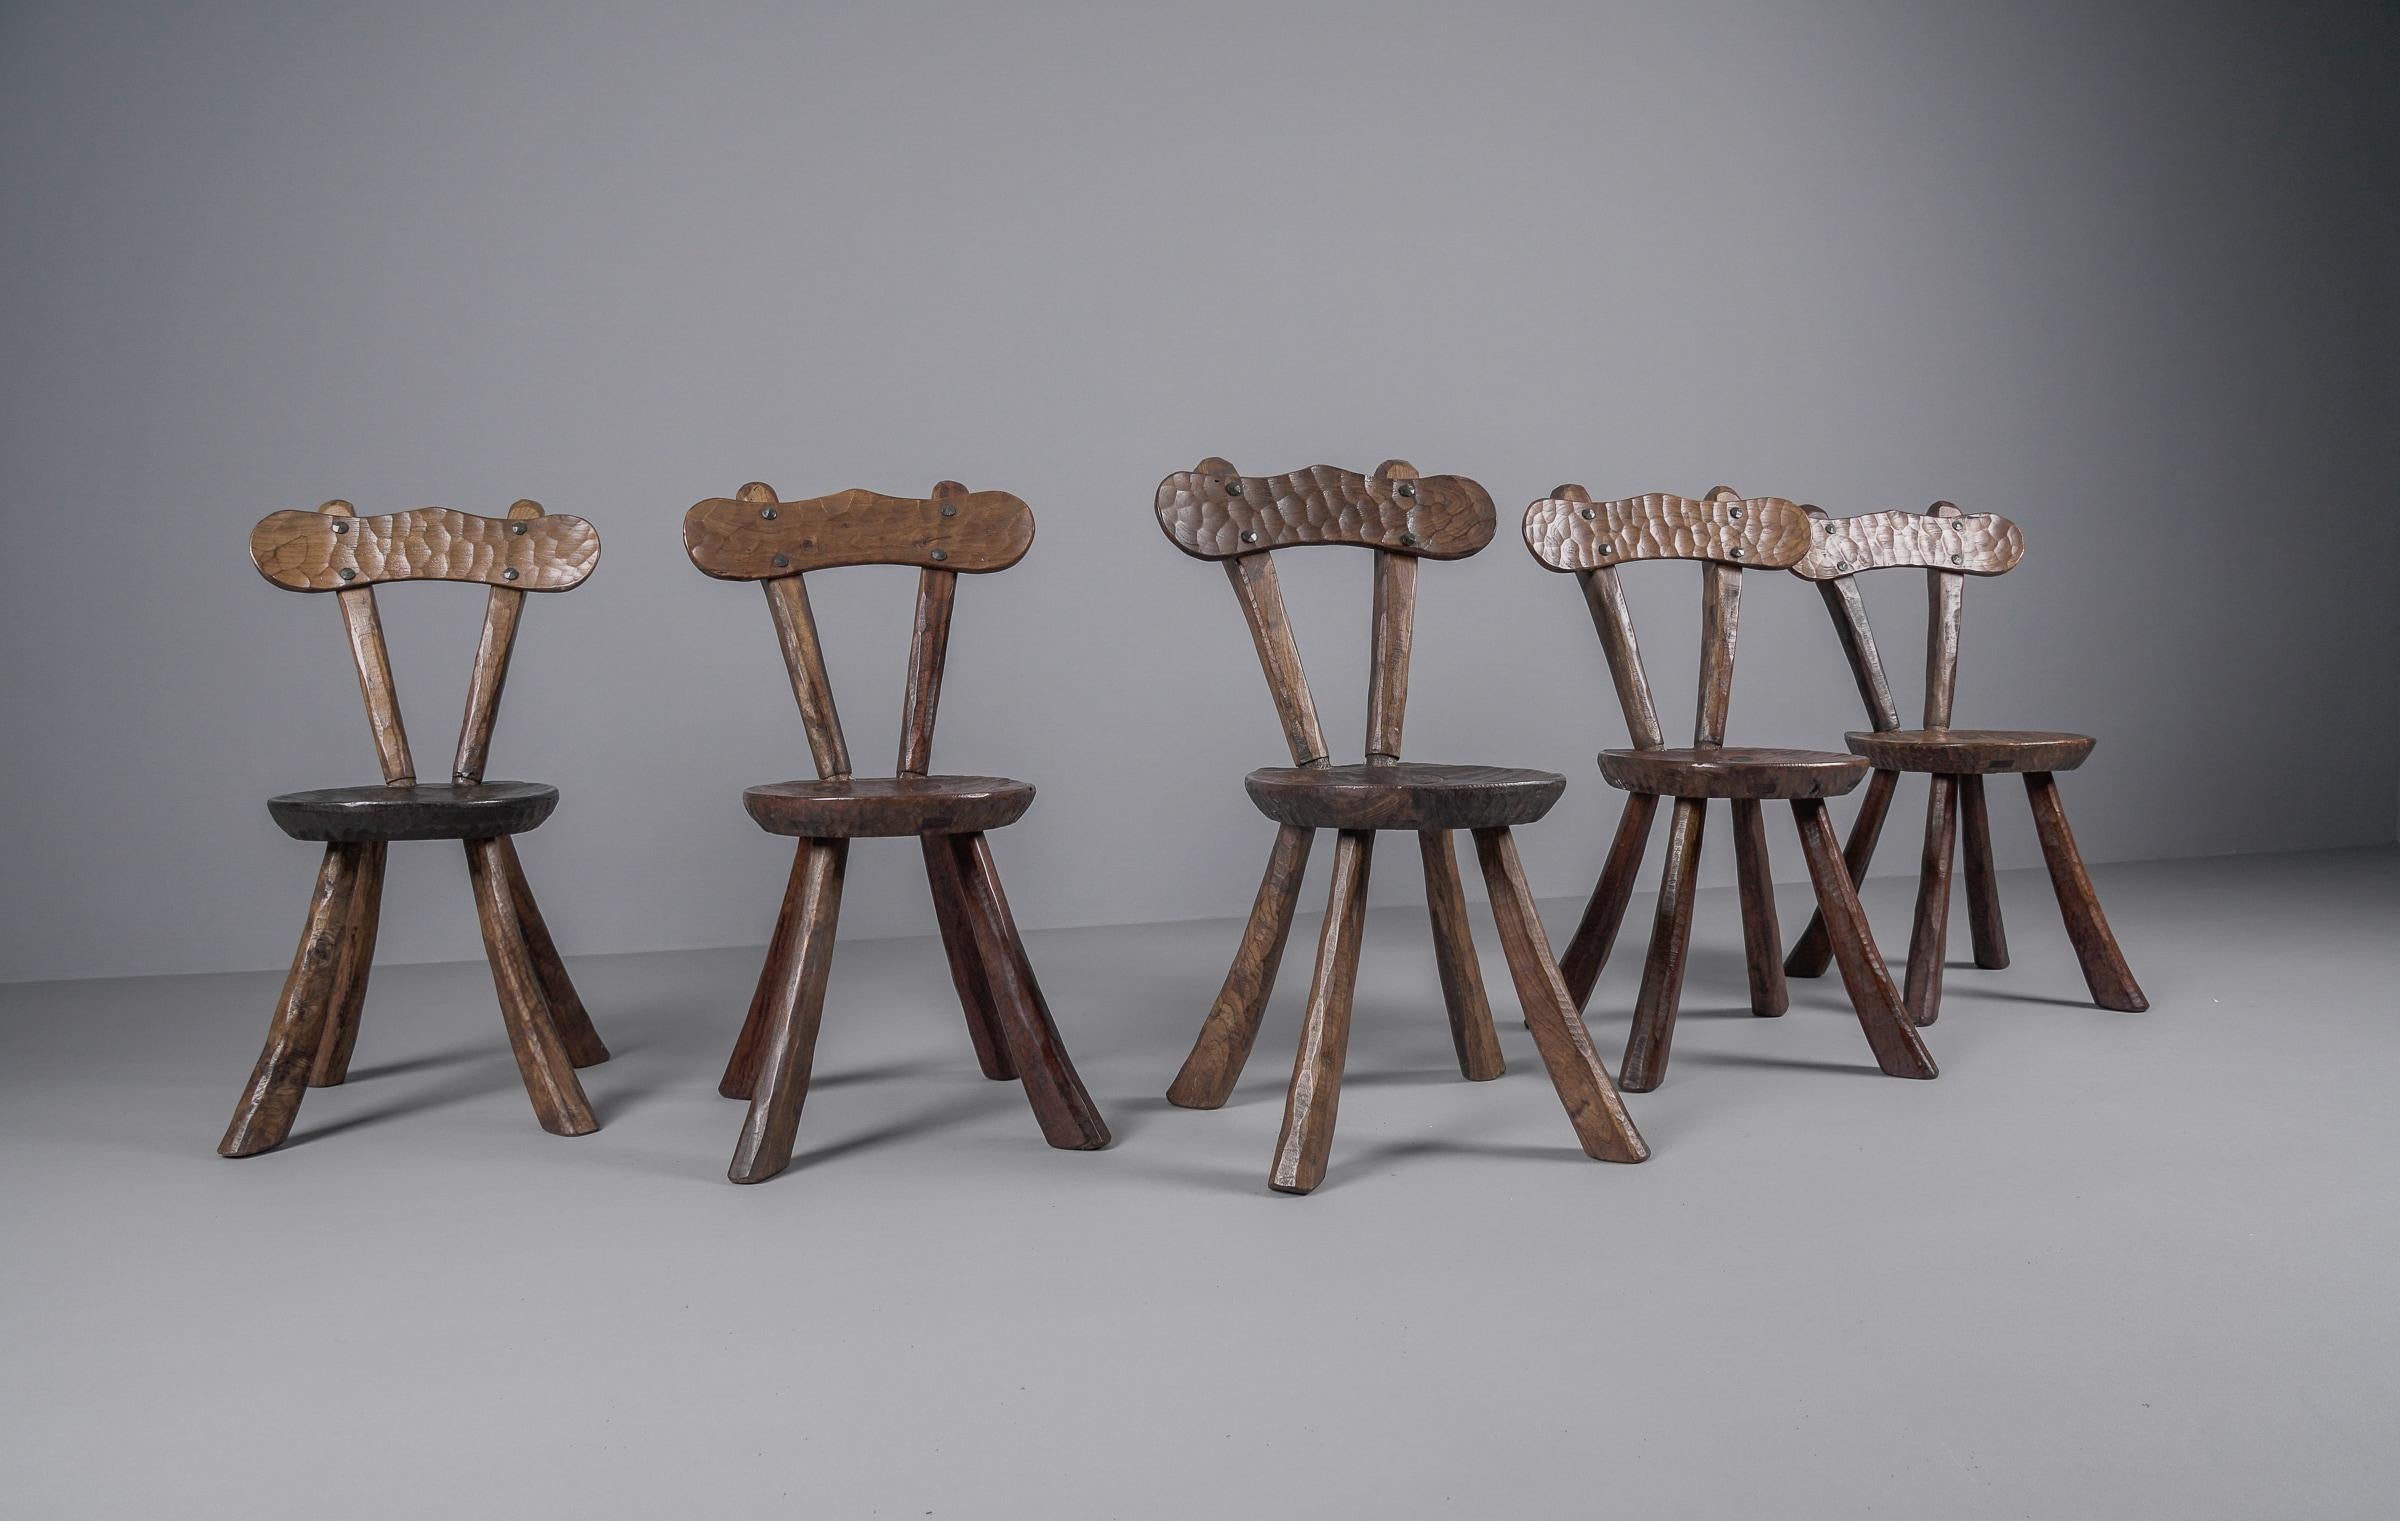 Hand-Carved Set of 5 Brutalist Rustic Modern Sculptured Chairs i. t. Style of Alexandre Noll For Sale